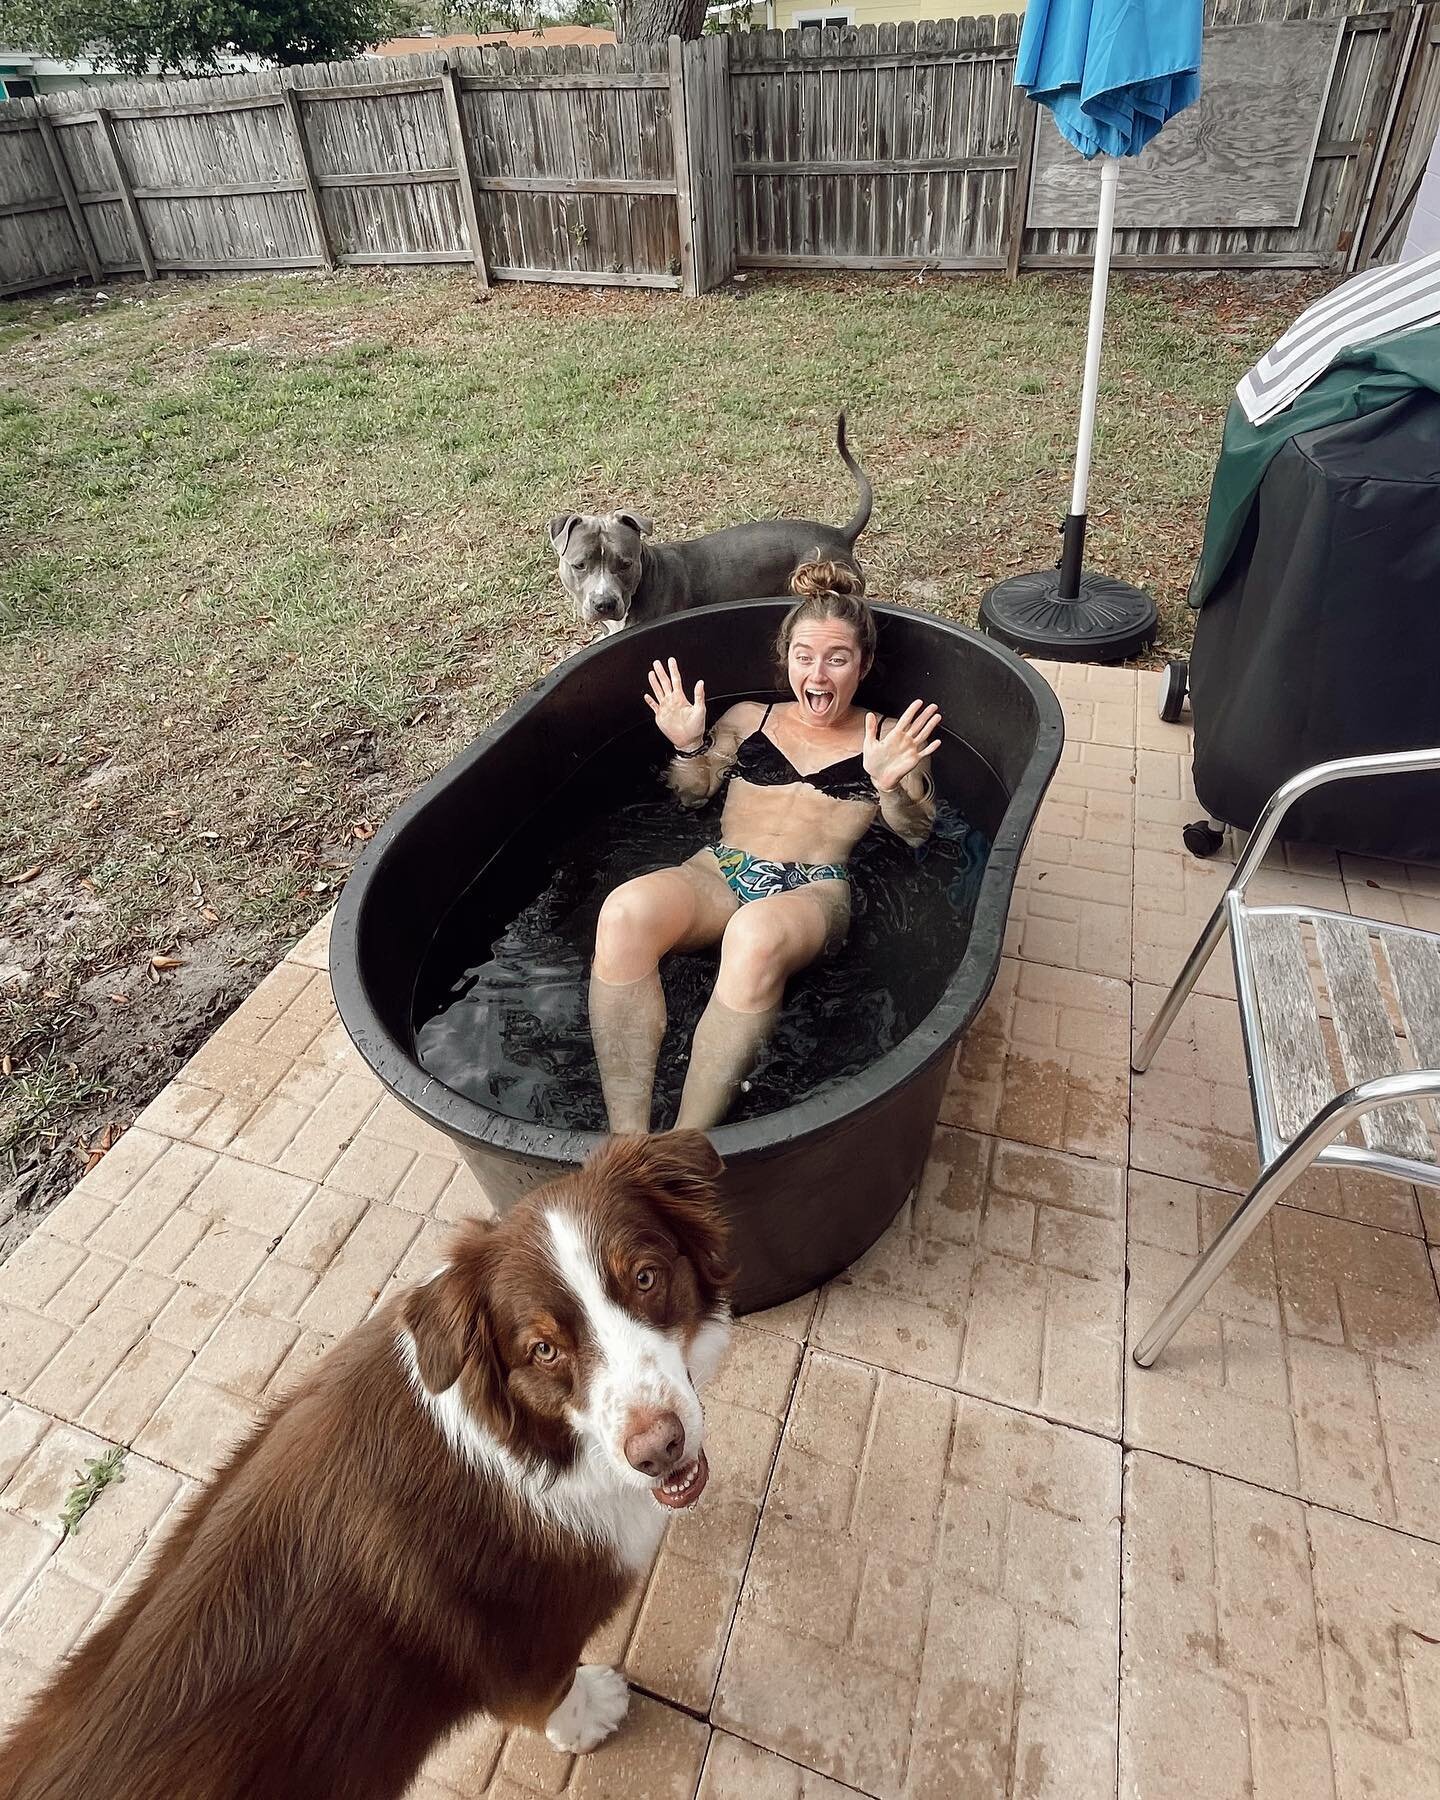 🧊Sunday evening ice bath recovery &gt;&gt;&gt; I swear there was two BIG bags of ice in here, it just melts quick in this FL heat 🫠 And look at these two good boiiiisss 🐶 
&bull;
I have a love/hate relationship with these ice plunges, but after li